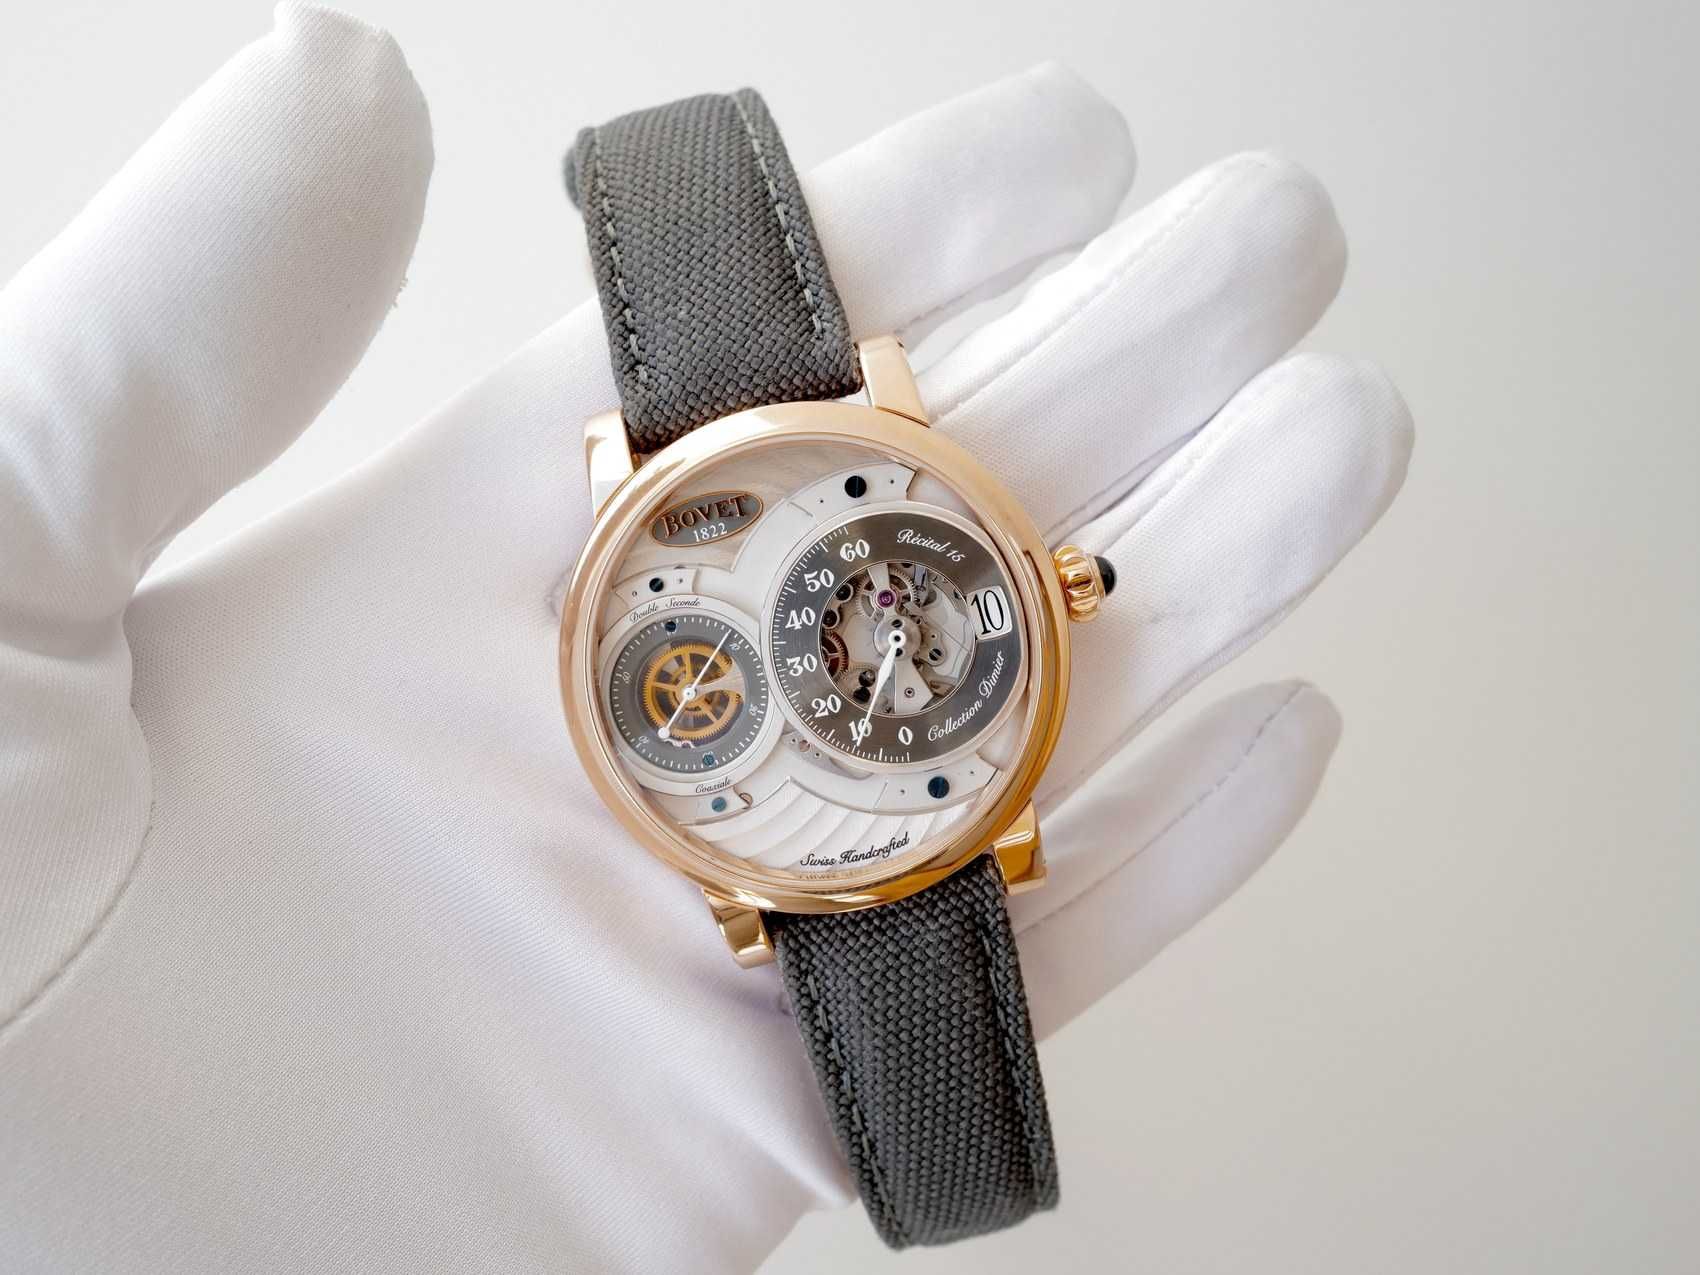 Bovet Dimier Récital 15 Jumping Hour Limited Edition 1st of 100